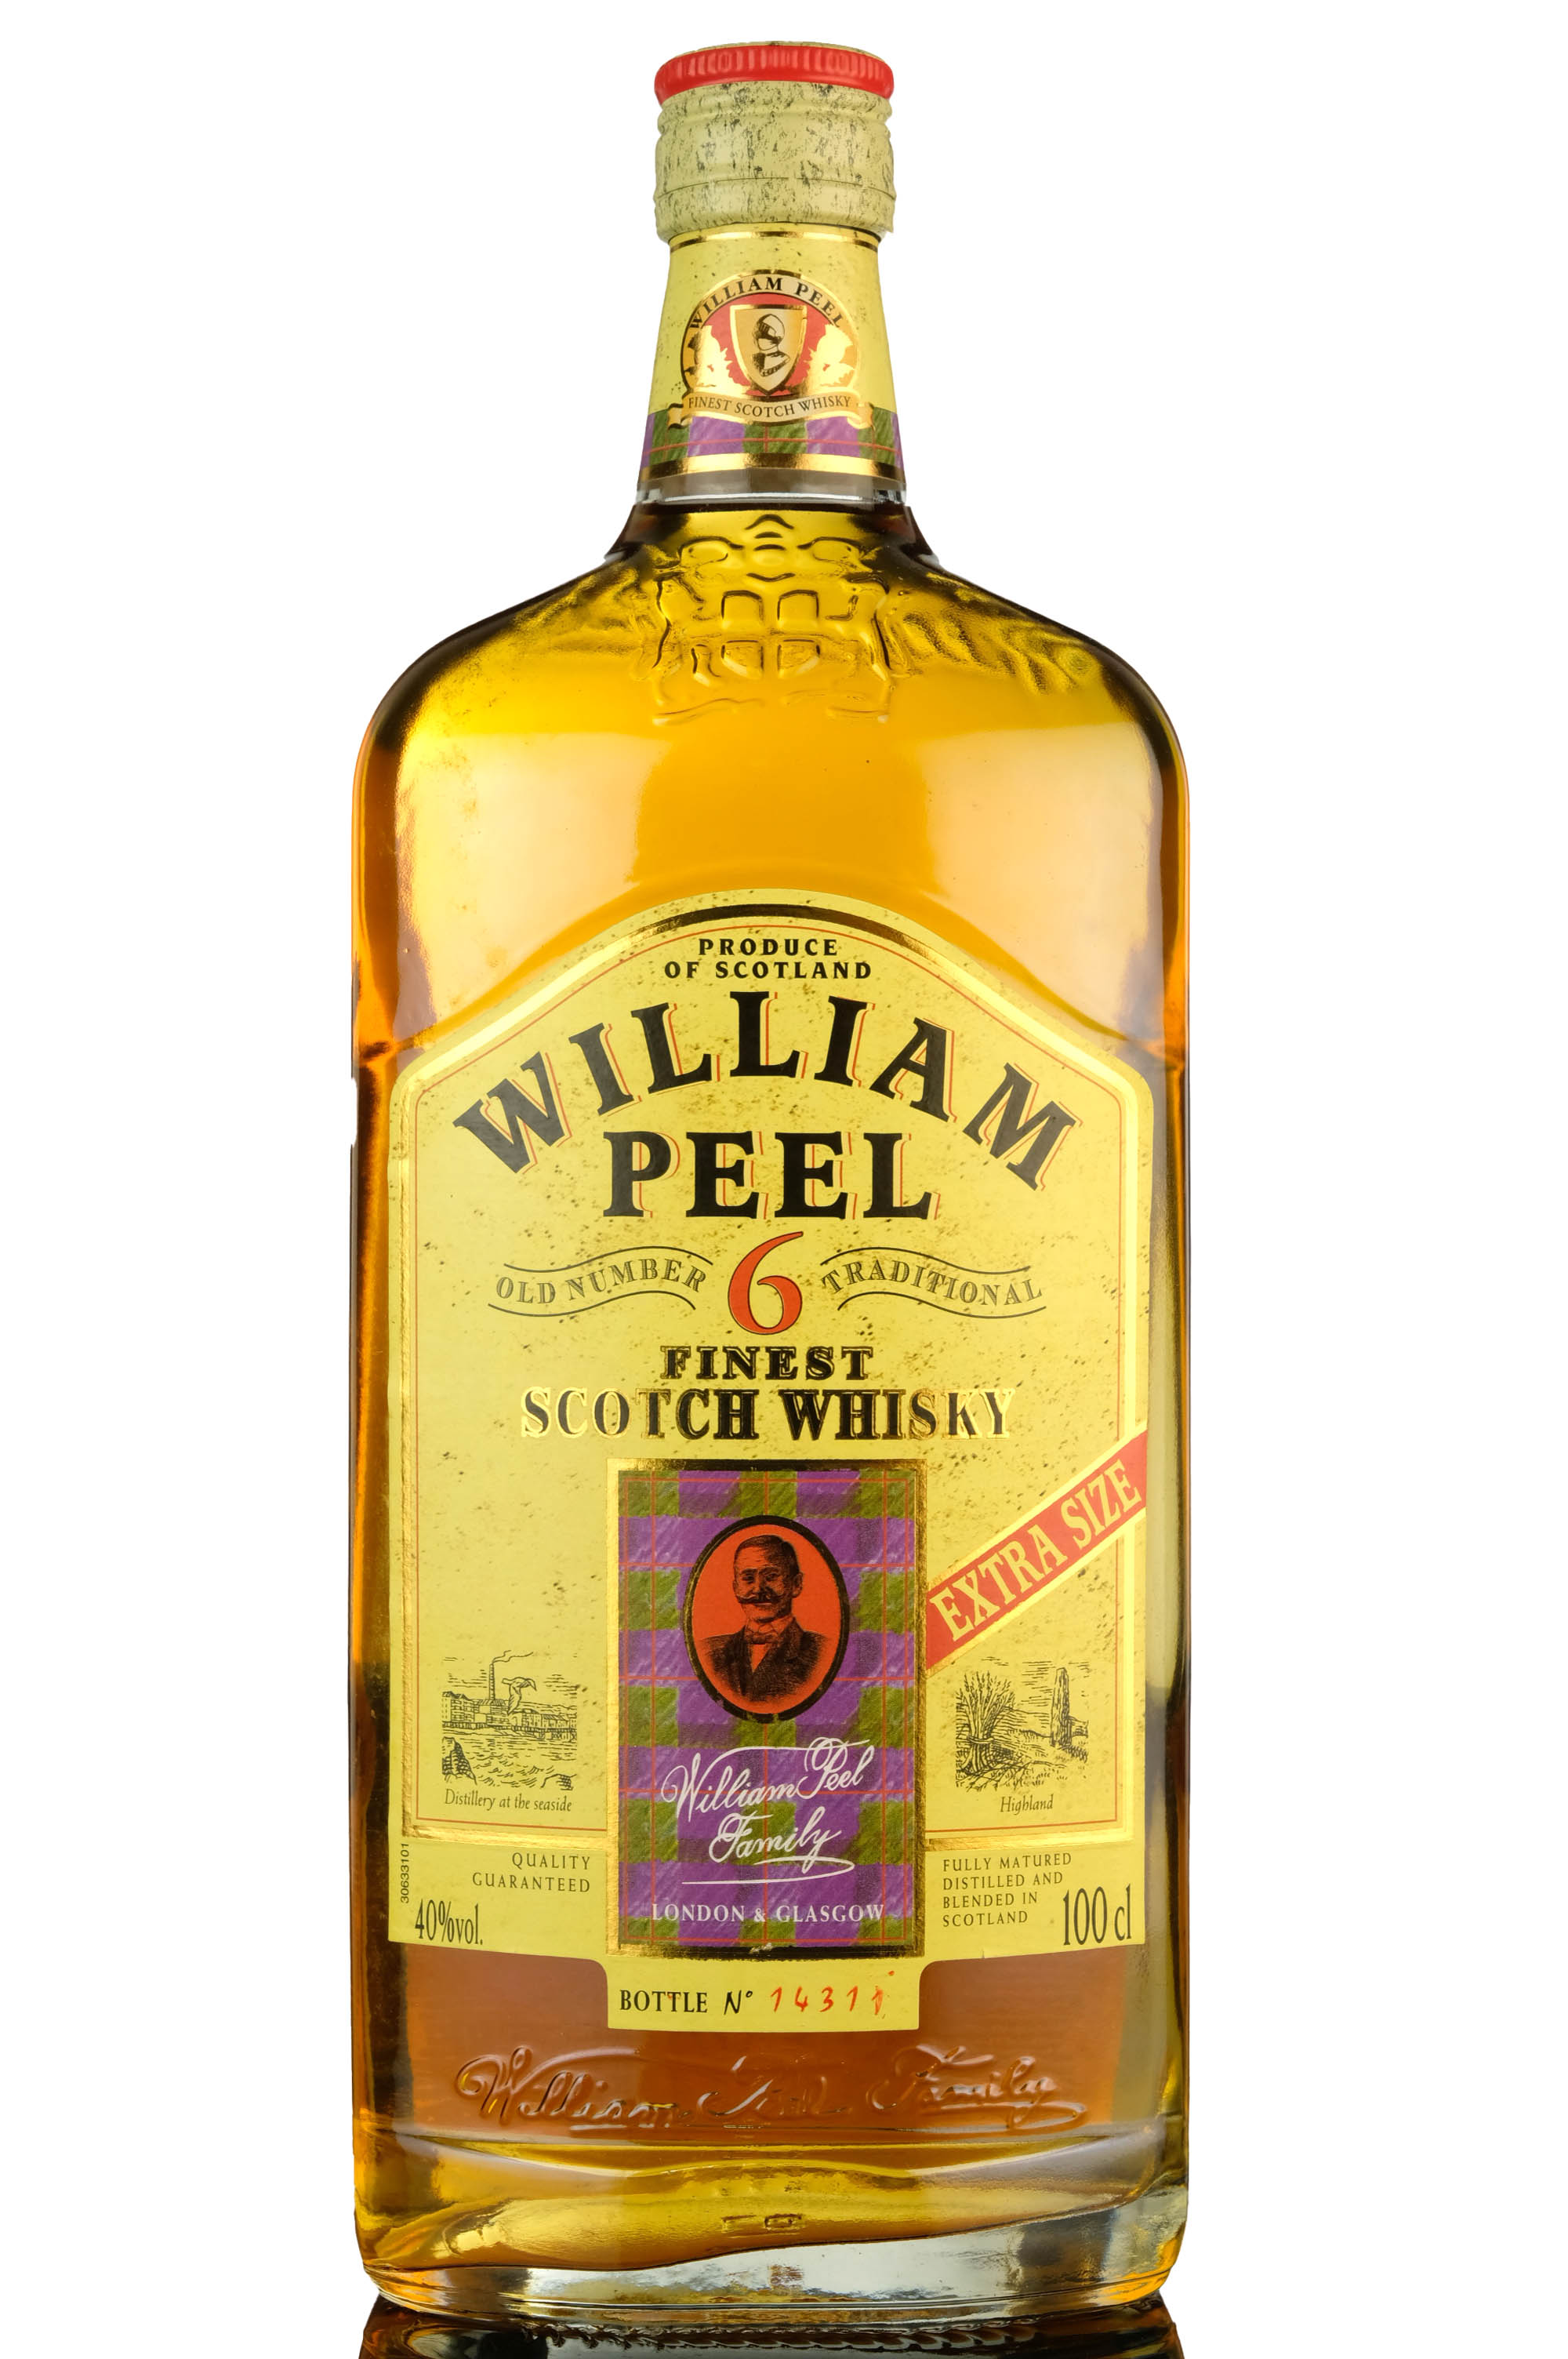 William Peel Old Number 6 Traditional - 1 Litre